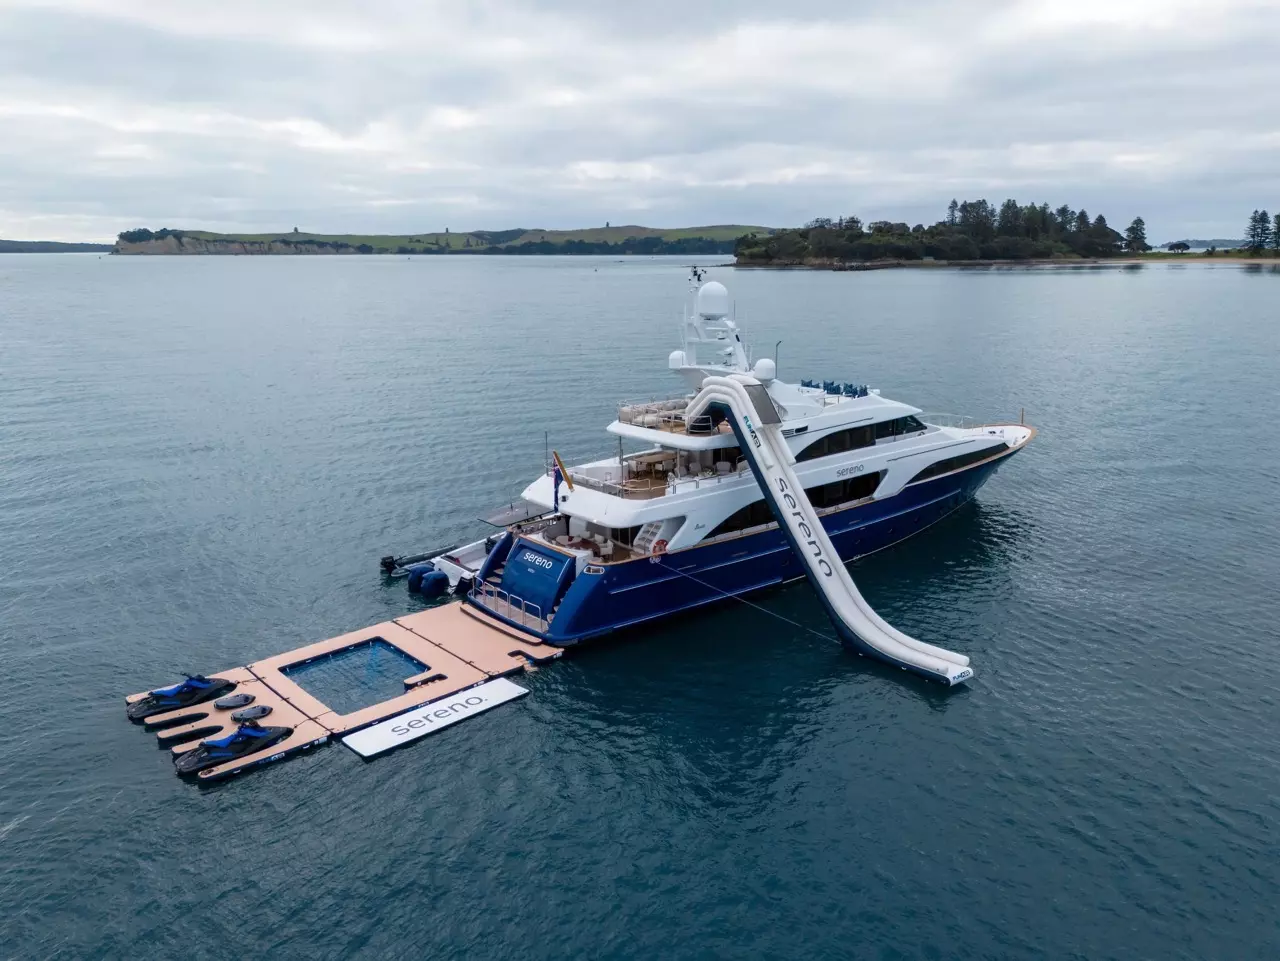 Sereno by Benetti - Top rates for a Rental of a private Superyacht in Fiji